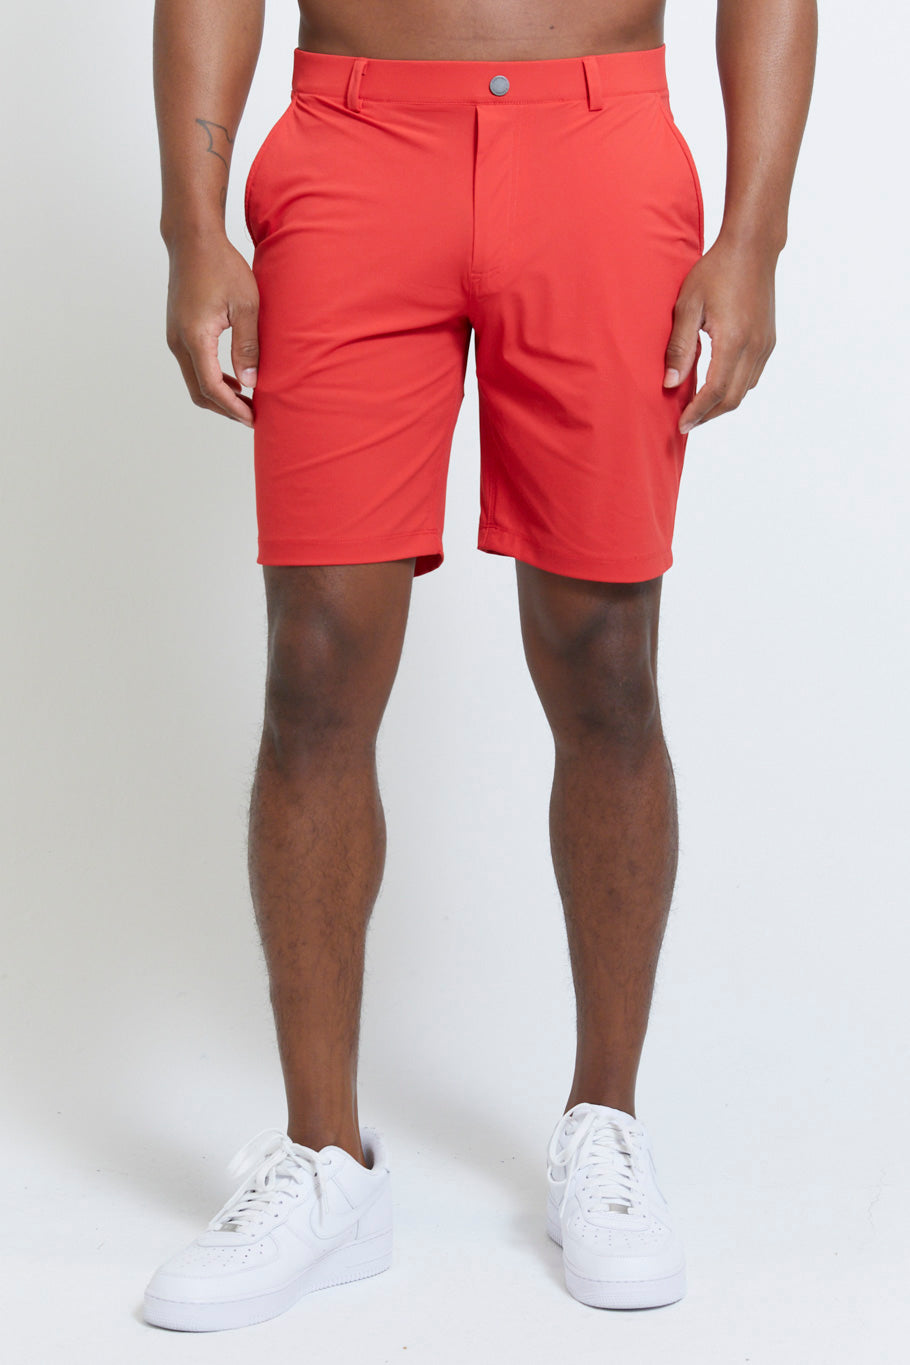 Image of the hanover pull-on short in rio